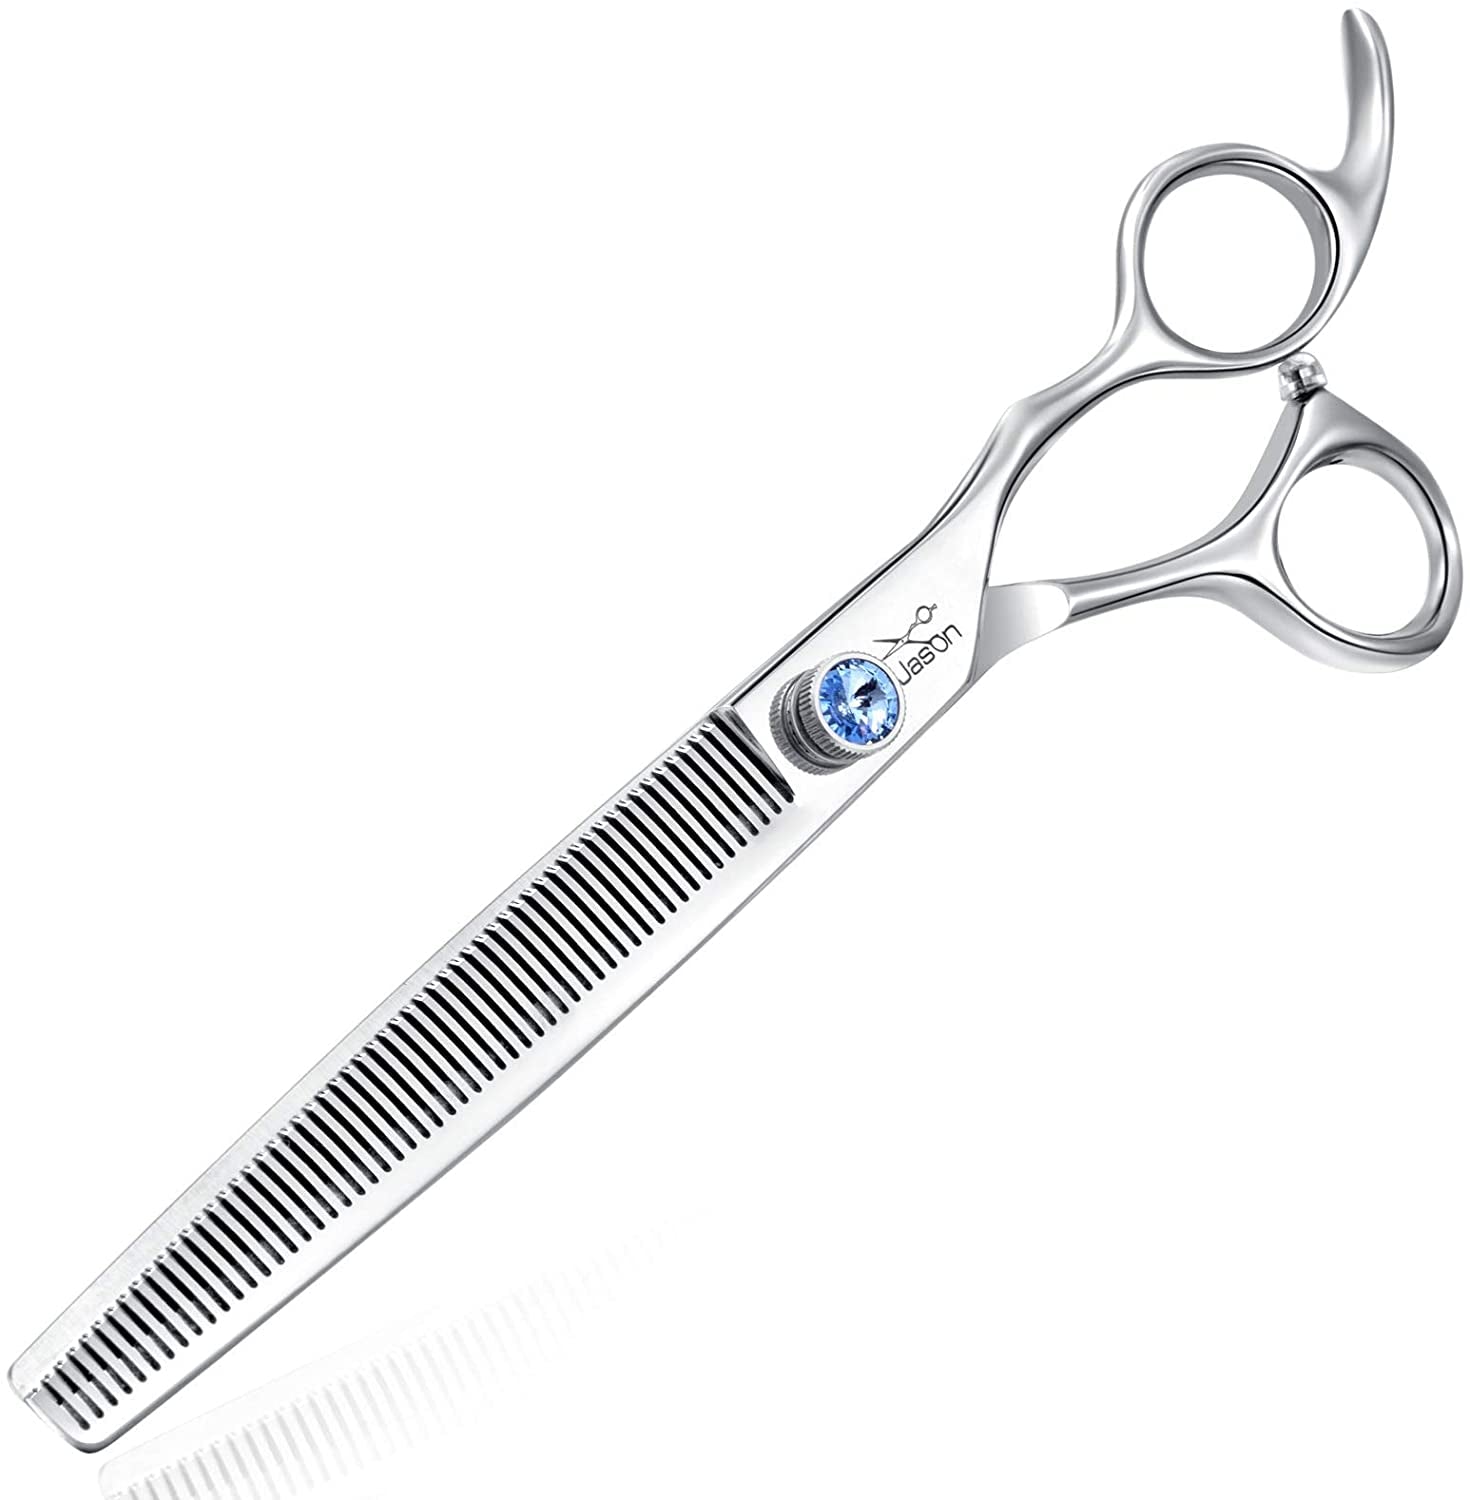 7.5" 56-Tooth Blending Dogs Grooming Scissors Cats Thinning Shears Pets Blender Thinner Trimming Texturizing Kit with Offset Handle Blue Jewelled Screw (7.5 Inch)